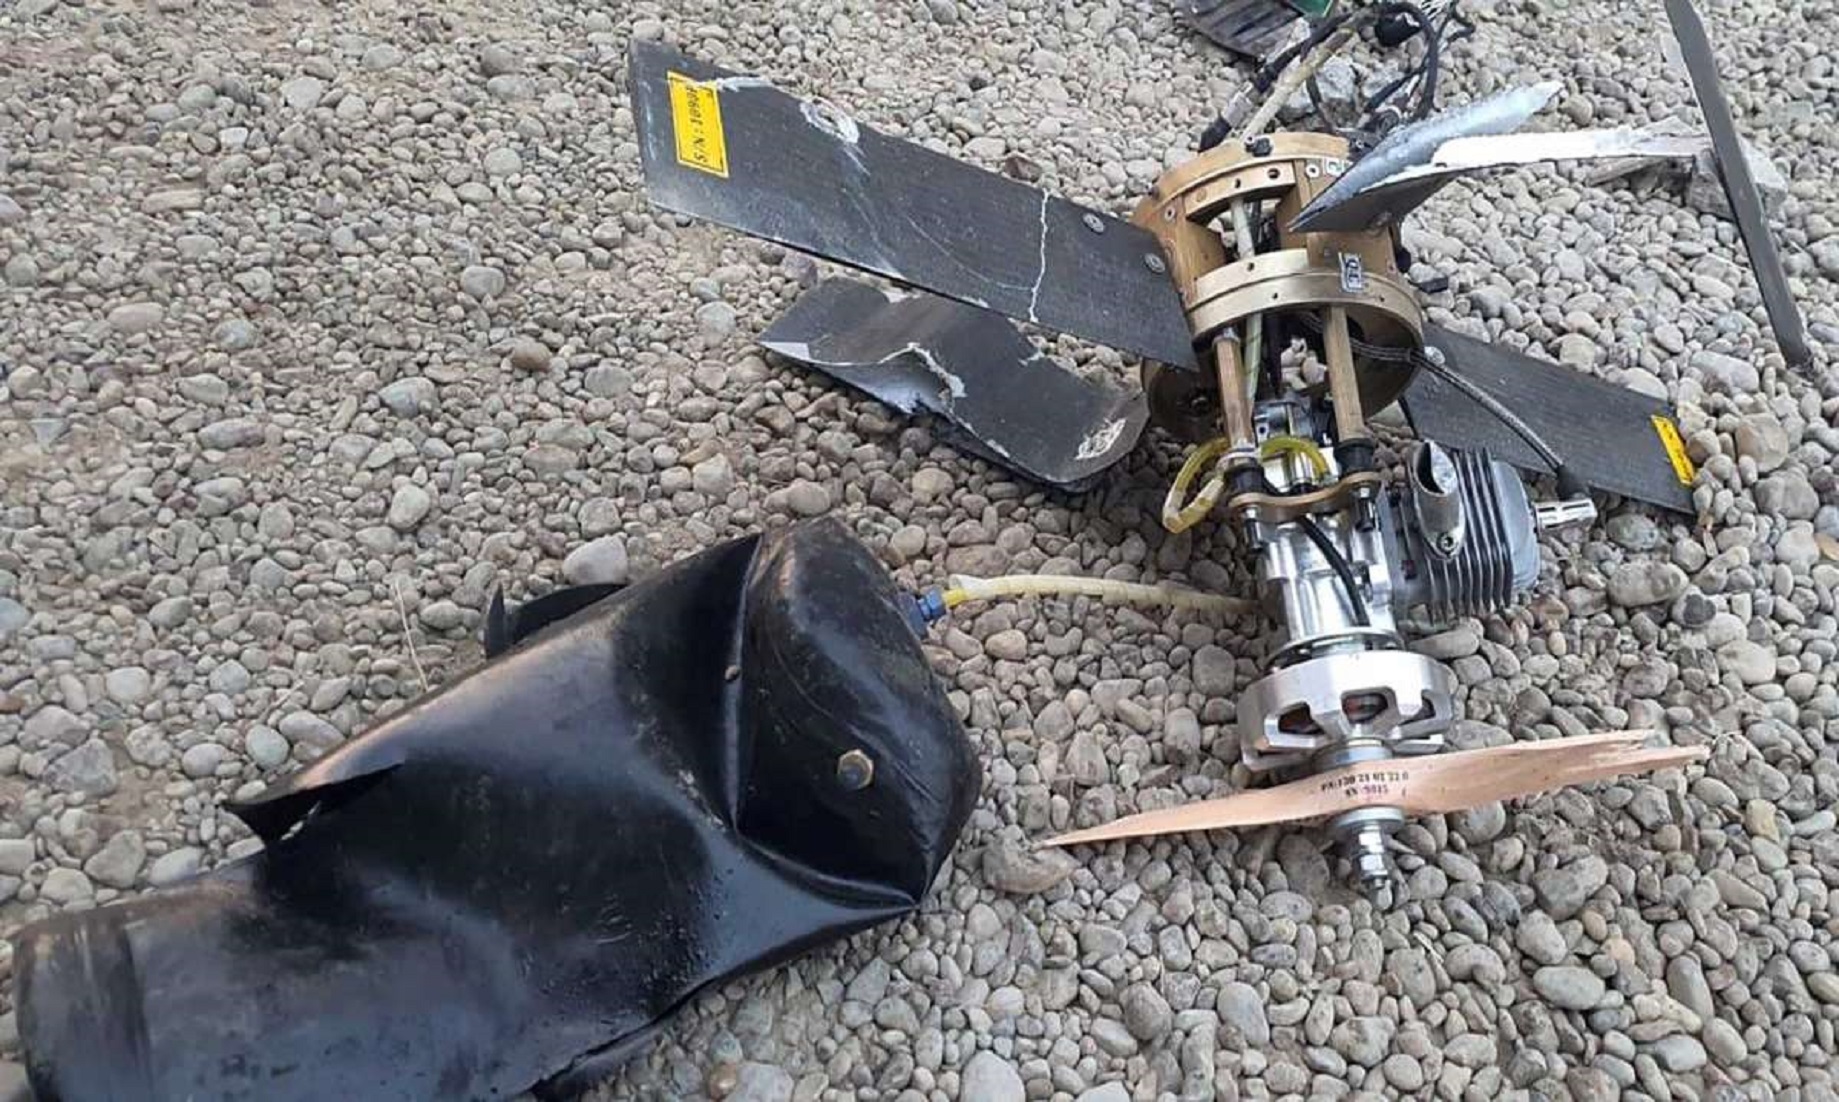 Two Drones Shot Down At Baghdad Airport: Source